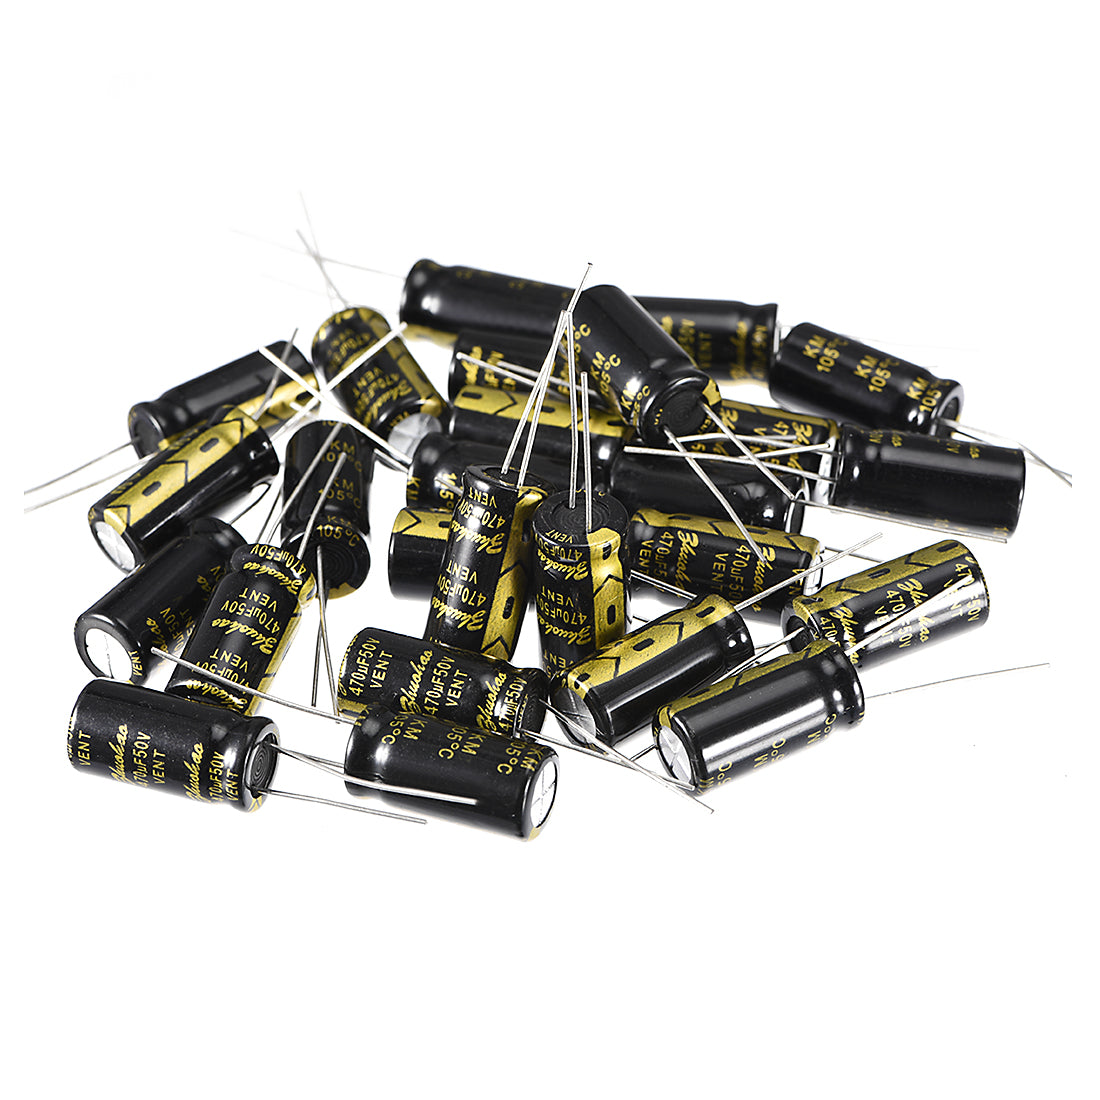 uxcell Uxcell Aluminum Radial Electrolytic Capacitor with 470uF 50V 105 Celsius Life 2000H 10 x 20 mm Black 25pcs